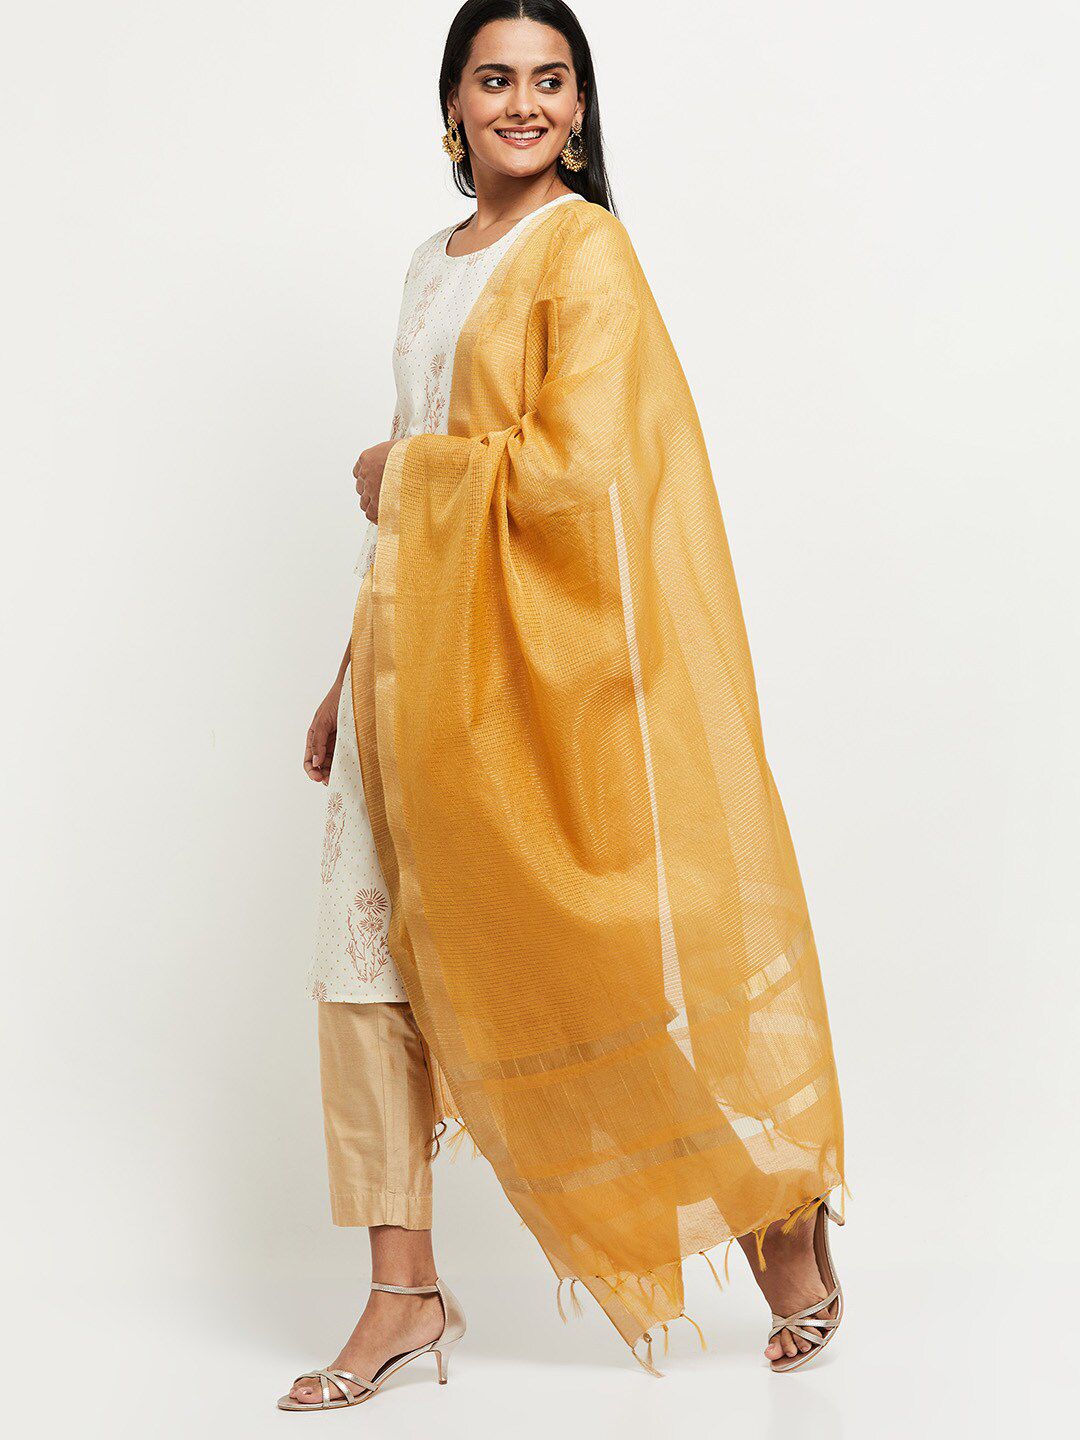 max Yellow and Gold-Toned Embellished Dupatta Price in India